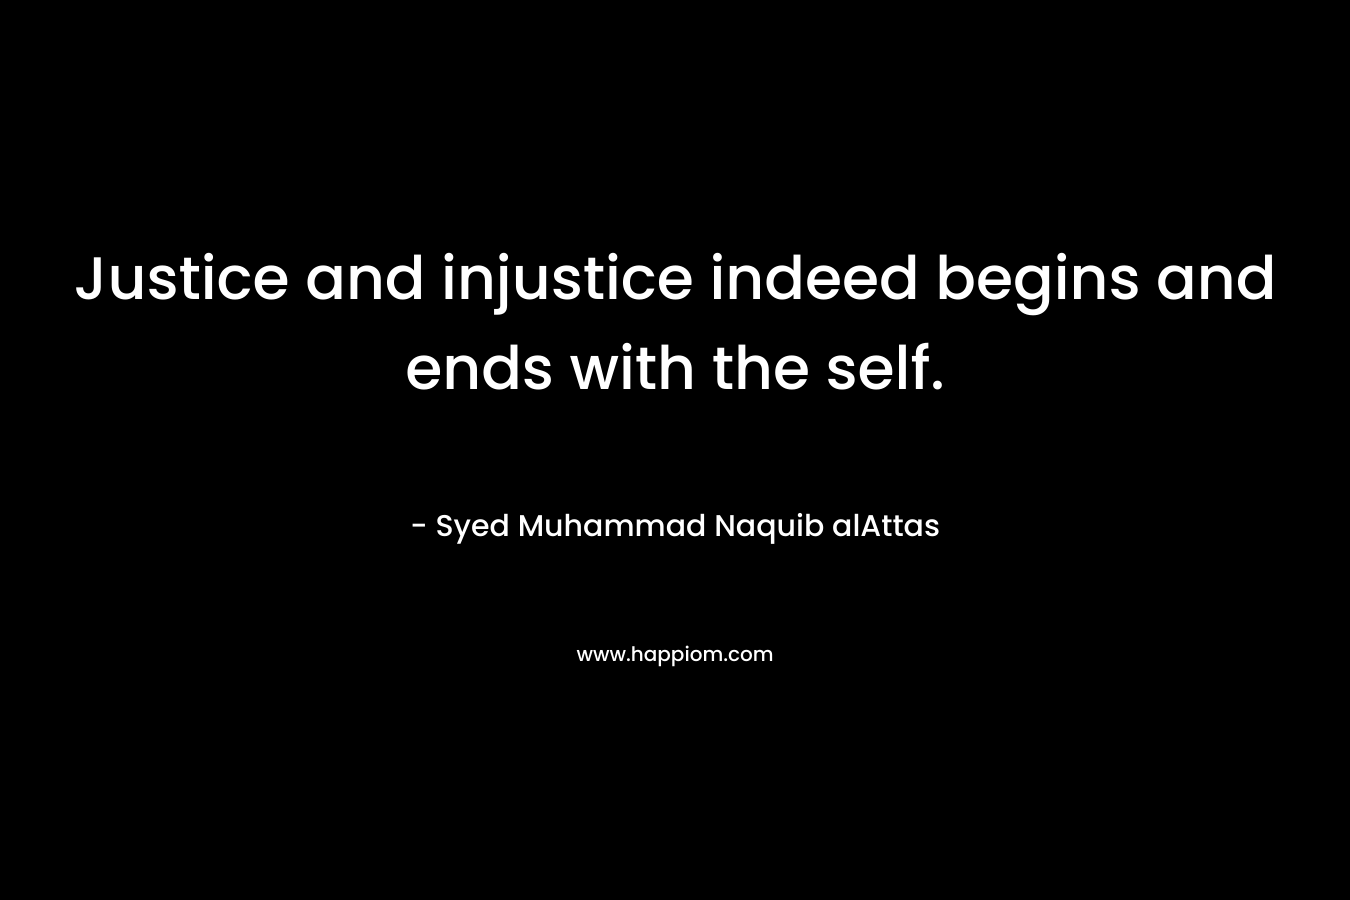 Justice and injustice indeed begins and ends with the self.